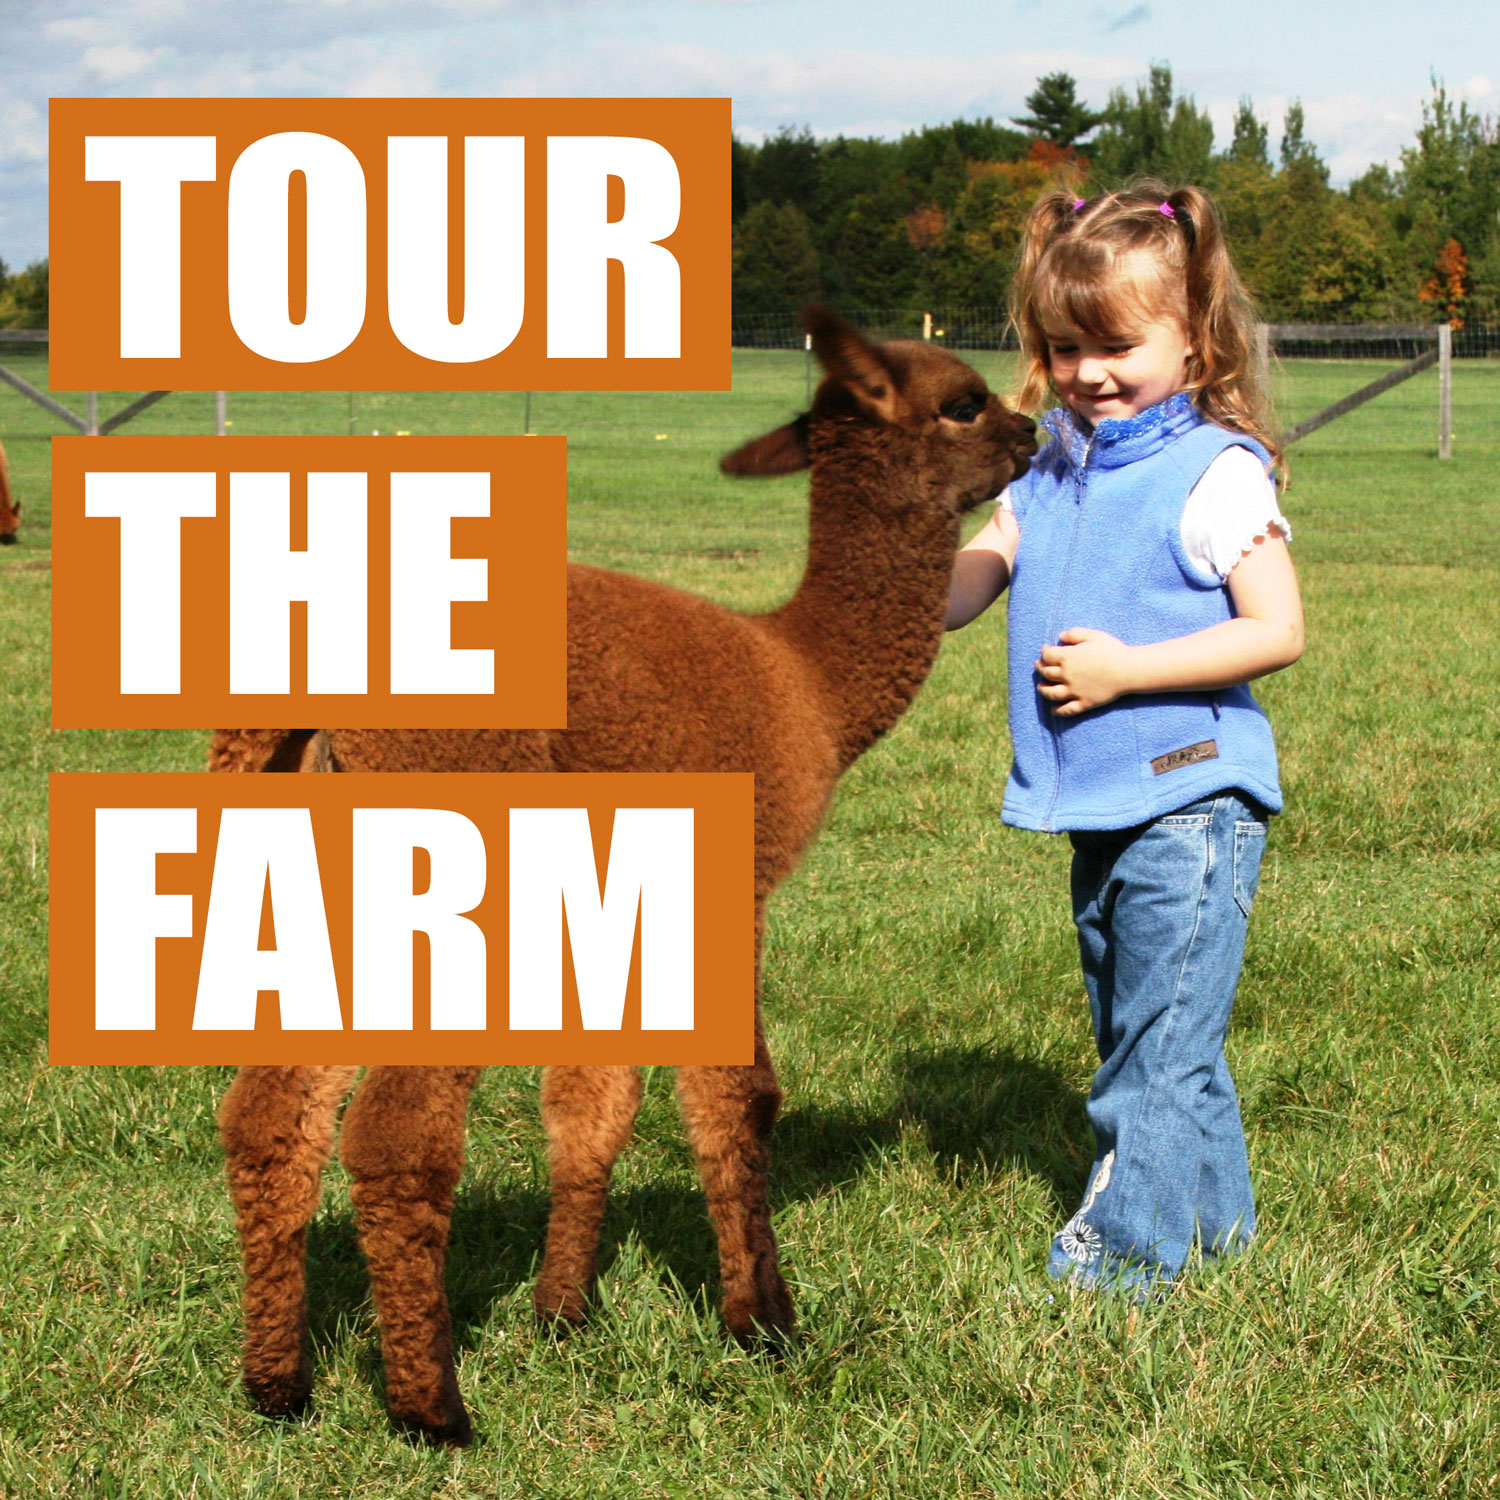 farm household tour meaning